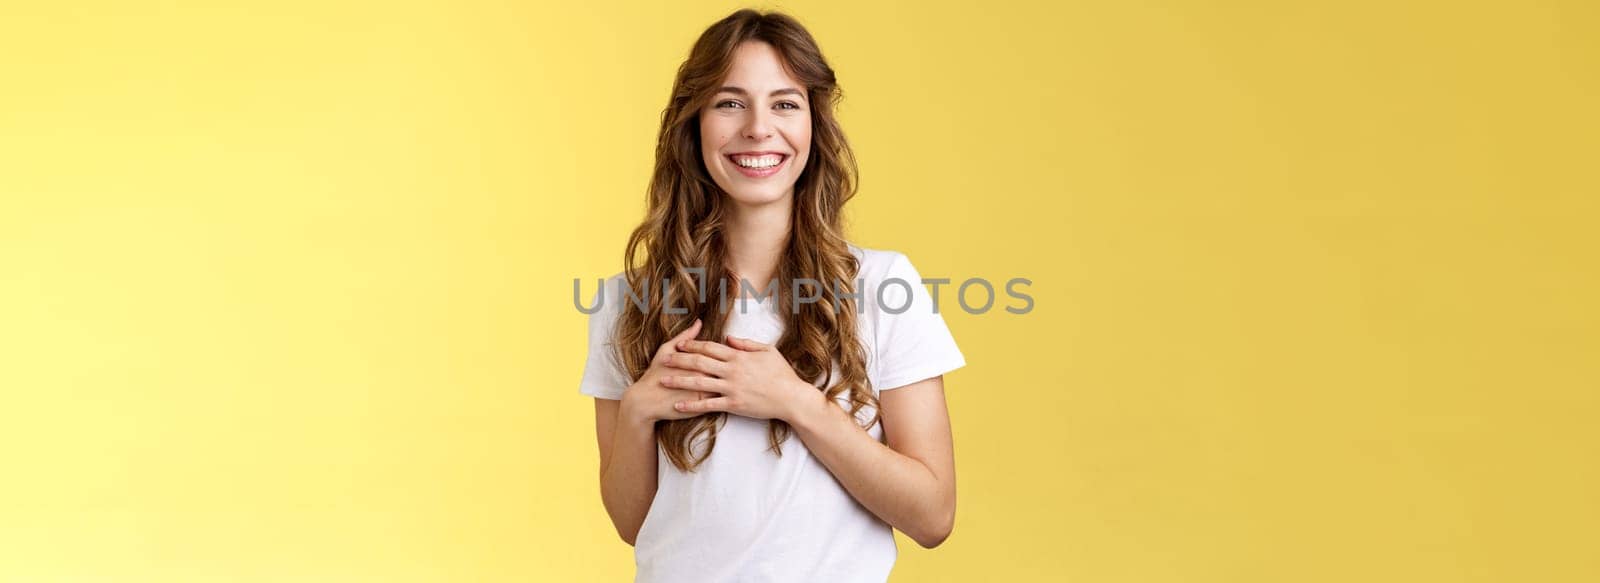 Tender heartwarming kind gentle feminine girl curly long hairstyle look sincere delighted squinting joyfully smiling broadly touch heart hold hands chest grateful lovely gaze stand yellow background. Lifestyle.